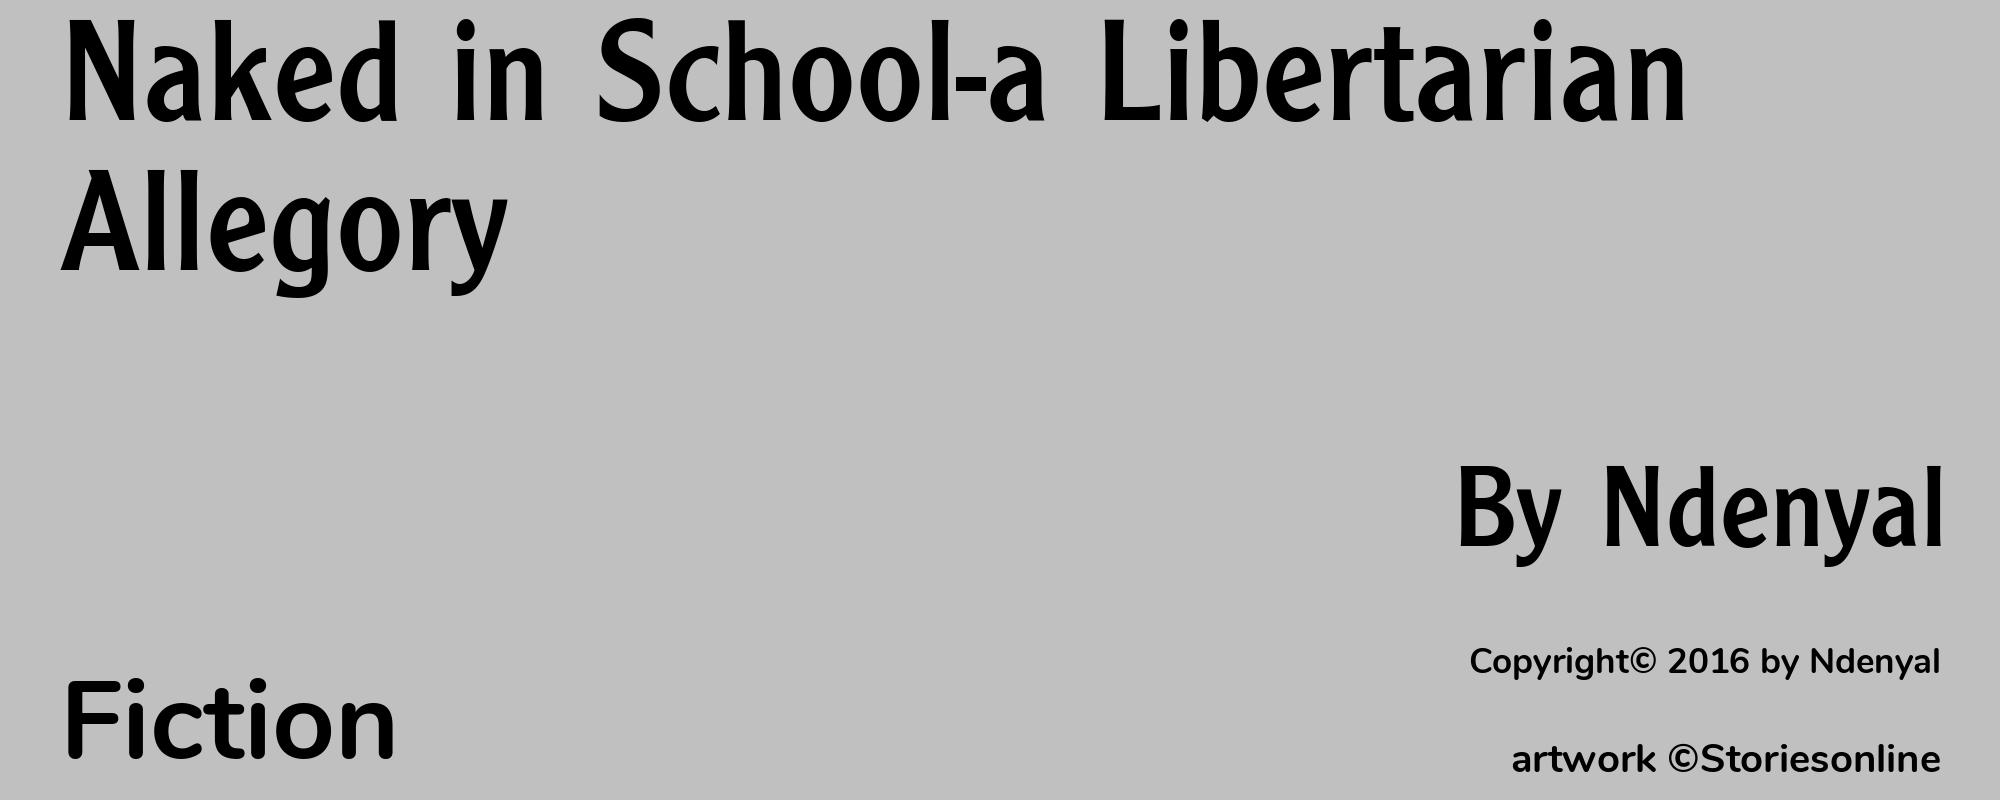 Naked in School-a Libertarian Allegory - Cover